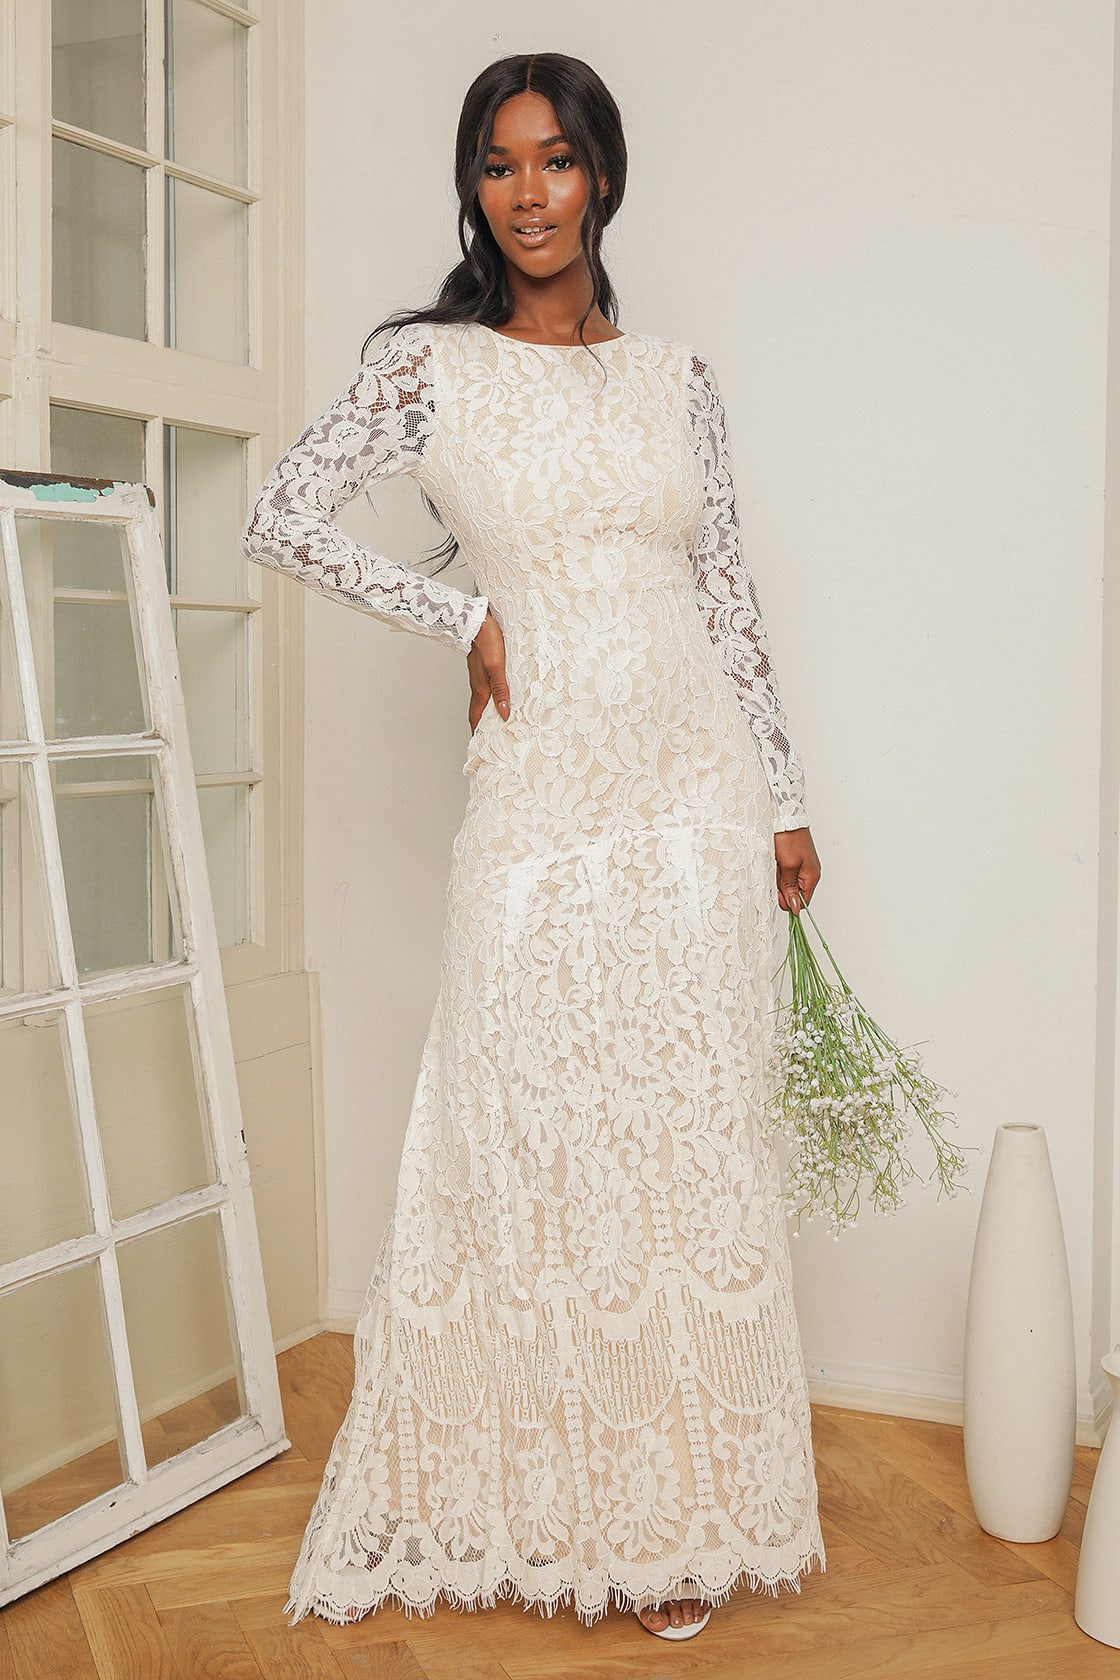 A model wears a long-sleeved lace wedding dress. The white dress is mermaid style with an all-over lace fabric that extends up the bodice with a high neckline and down the sleeves.